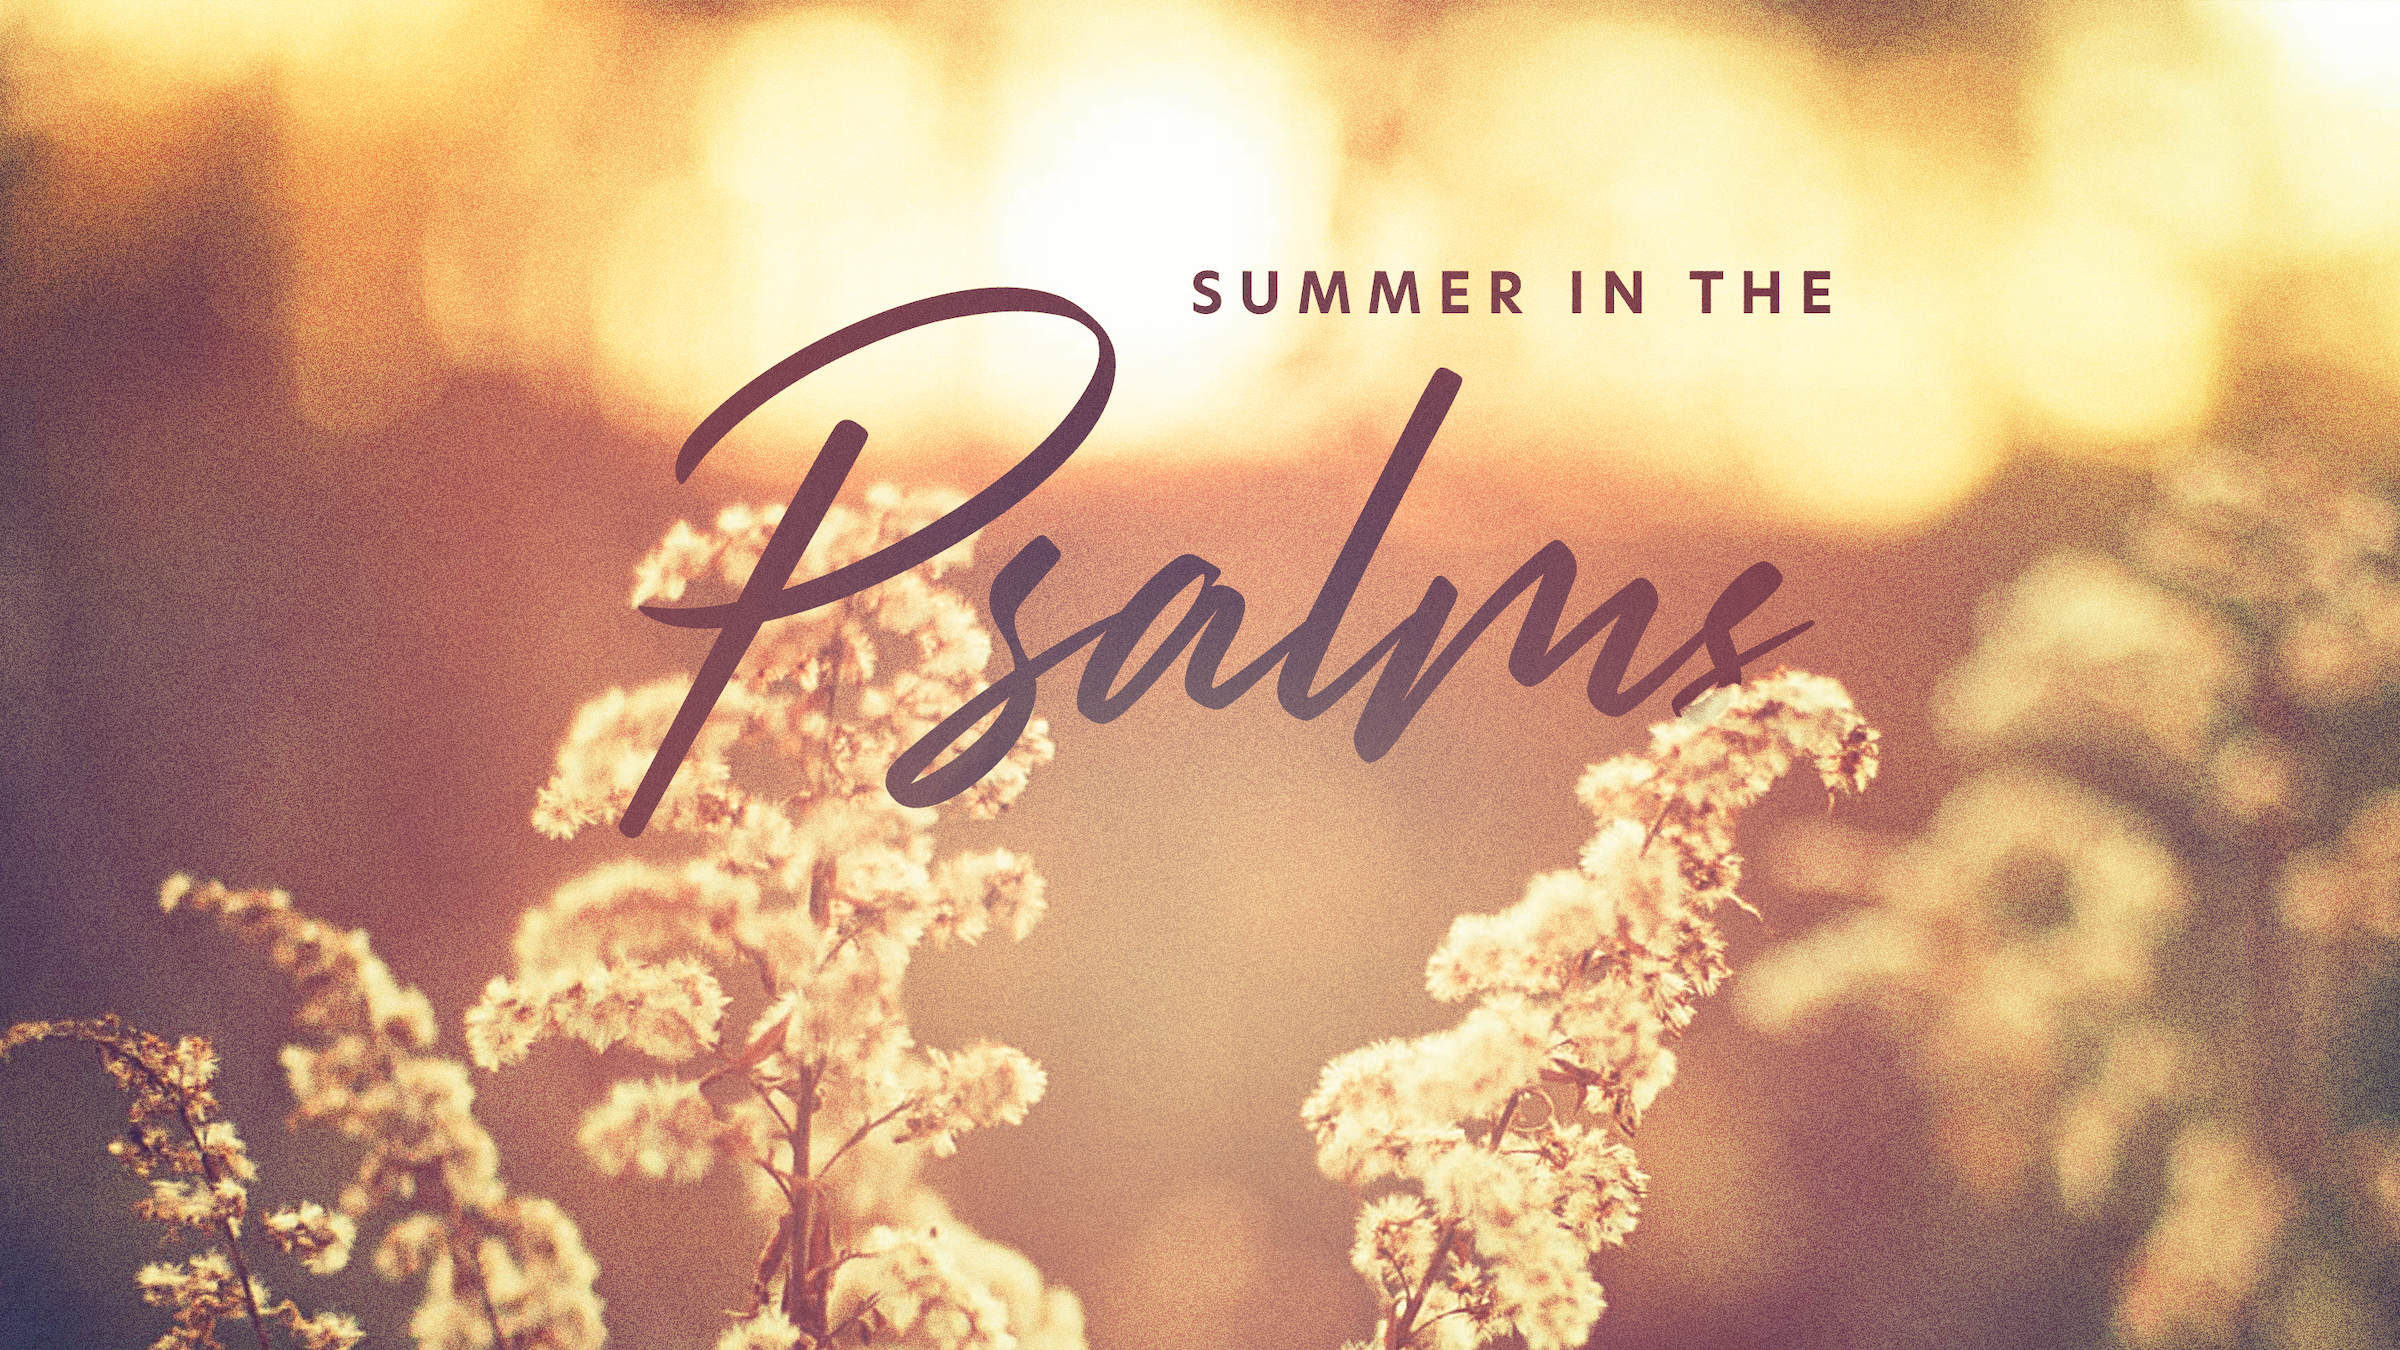 Summer in the Psalms 2